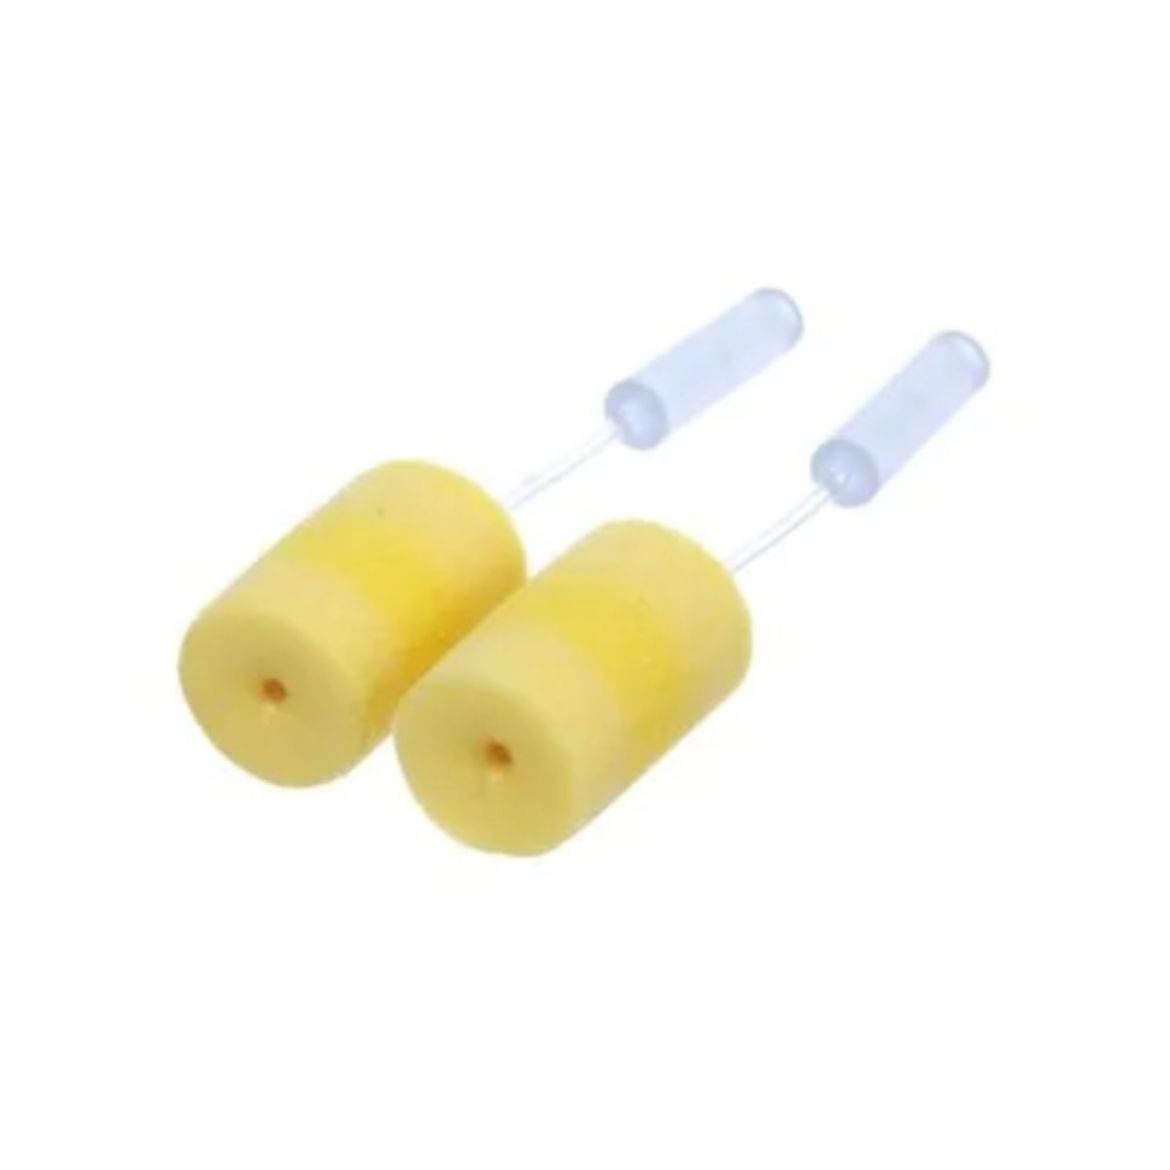 Picture of 393-2003-50 EARFIT™ VALIDATION TEST PLUGS YELLOW CLASSIC PROBED TEST EARPLUGS